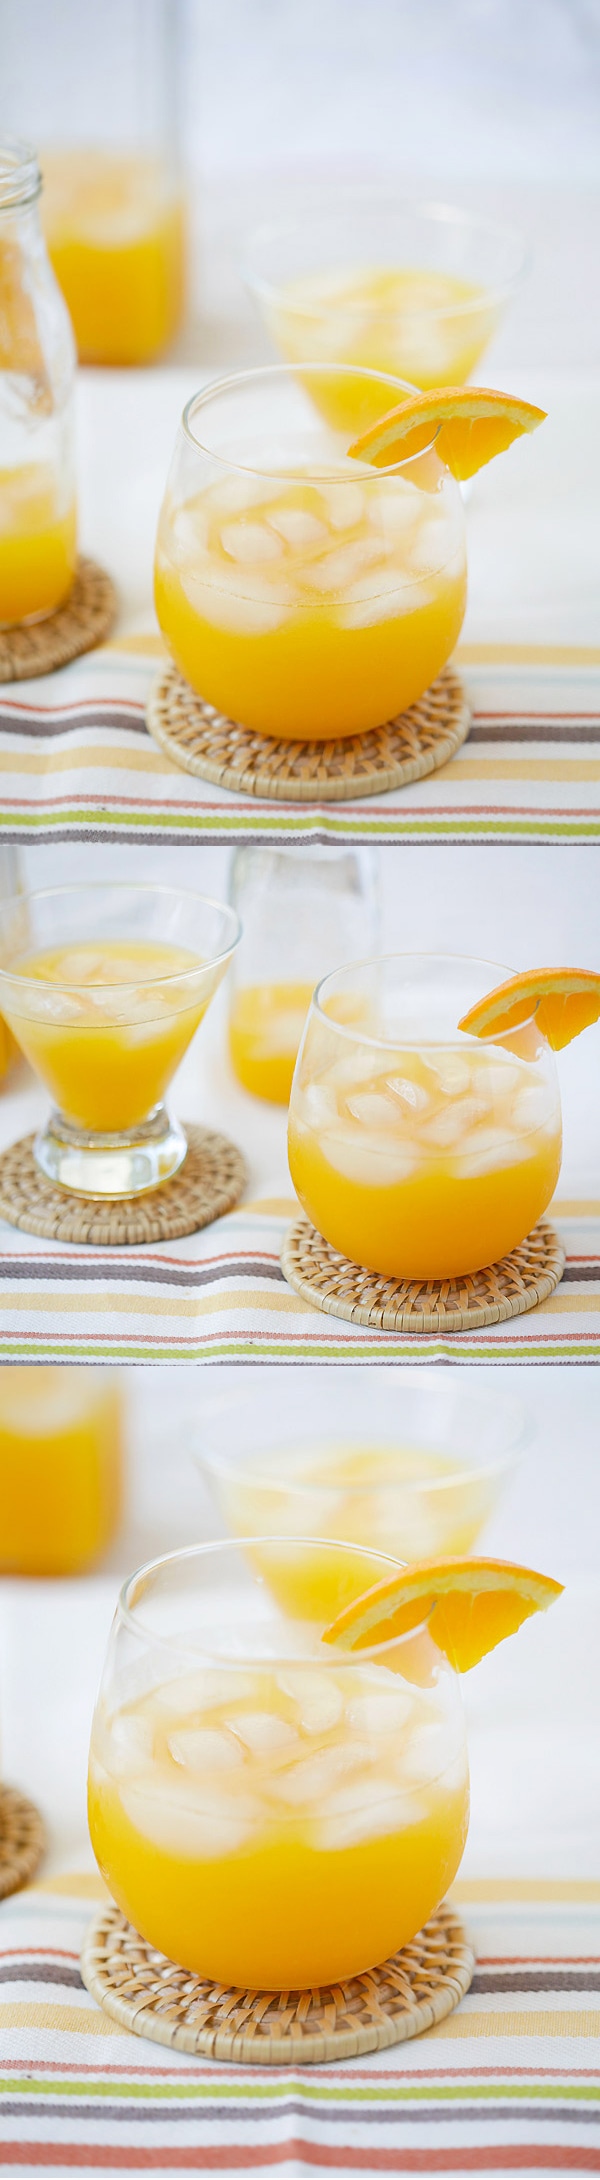 Screwdriver Cocktail - the easiest boozy cocktail that you can make at home with only two ingredients: orange, vodka and takes 10 mins! | rasamalaysia.com